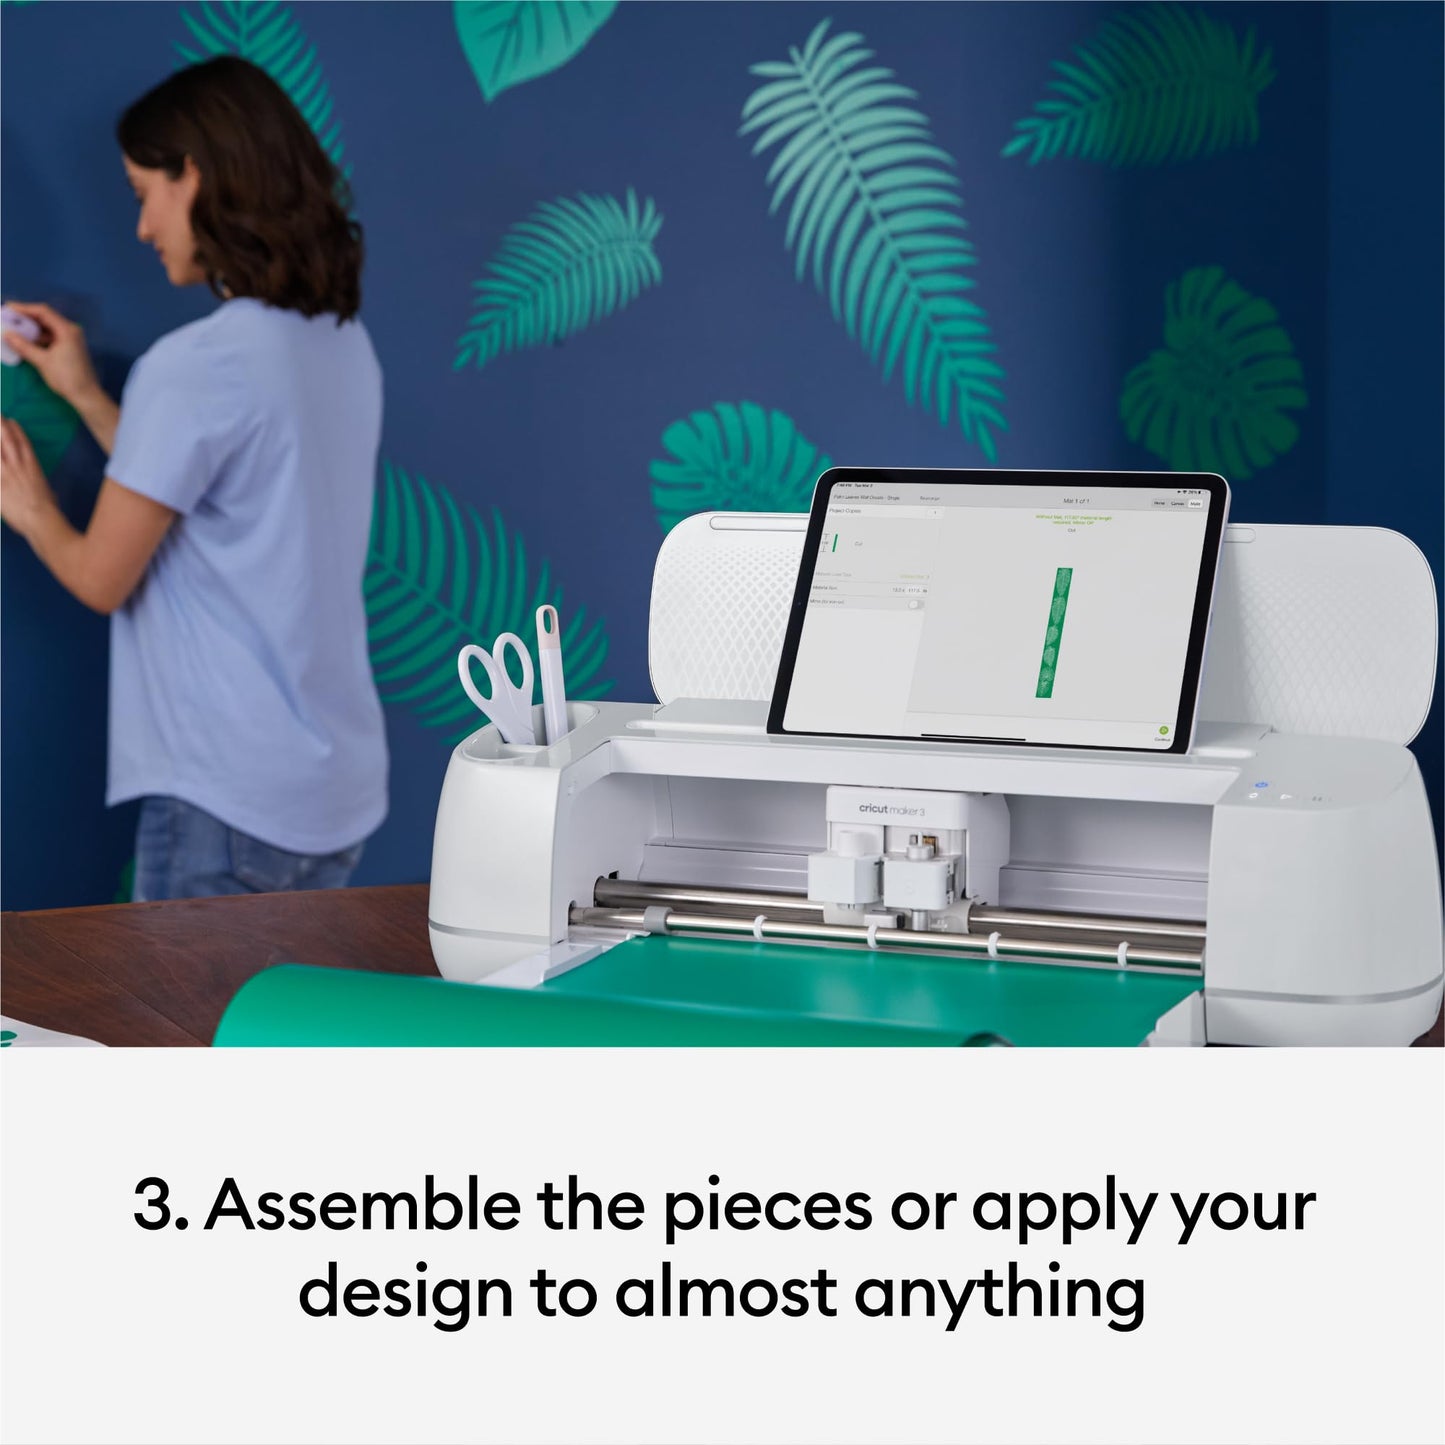 Cricut Maker 3 & Digital Content Library Bundle - Includes 30 images in Design Space App - Smart Cutting Machine, 2X Faster & 10X Cutting Force, Cuts